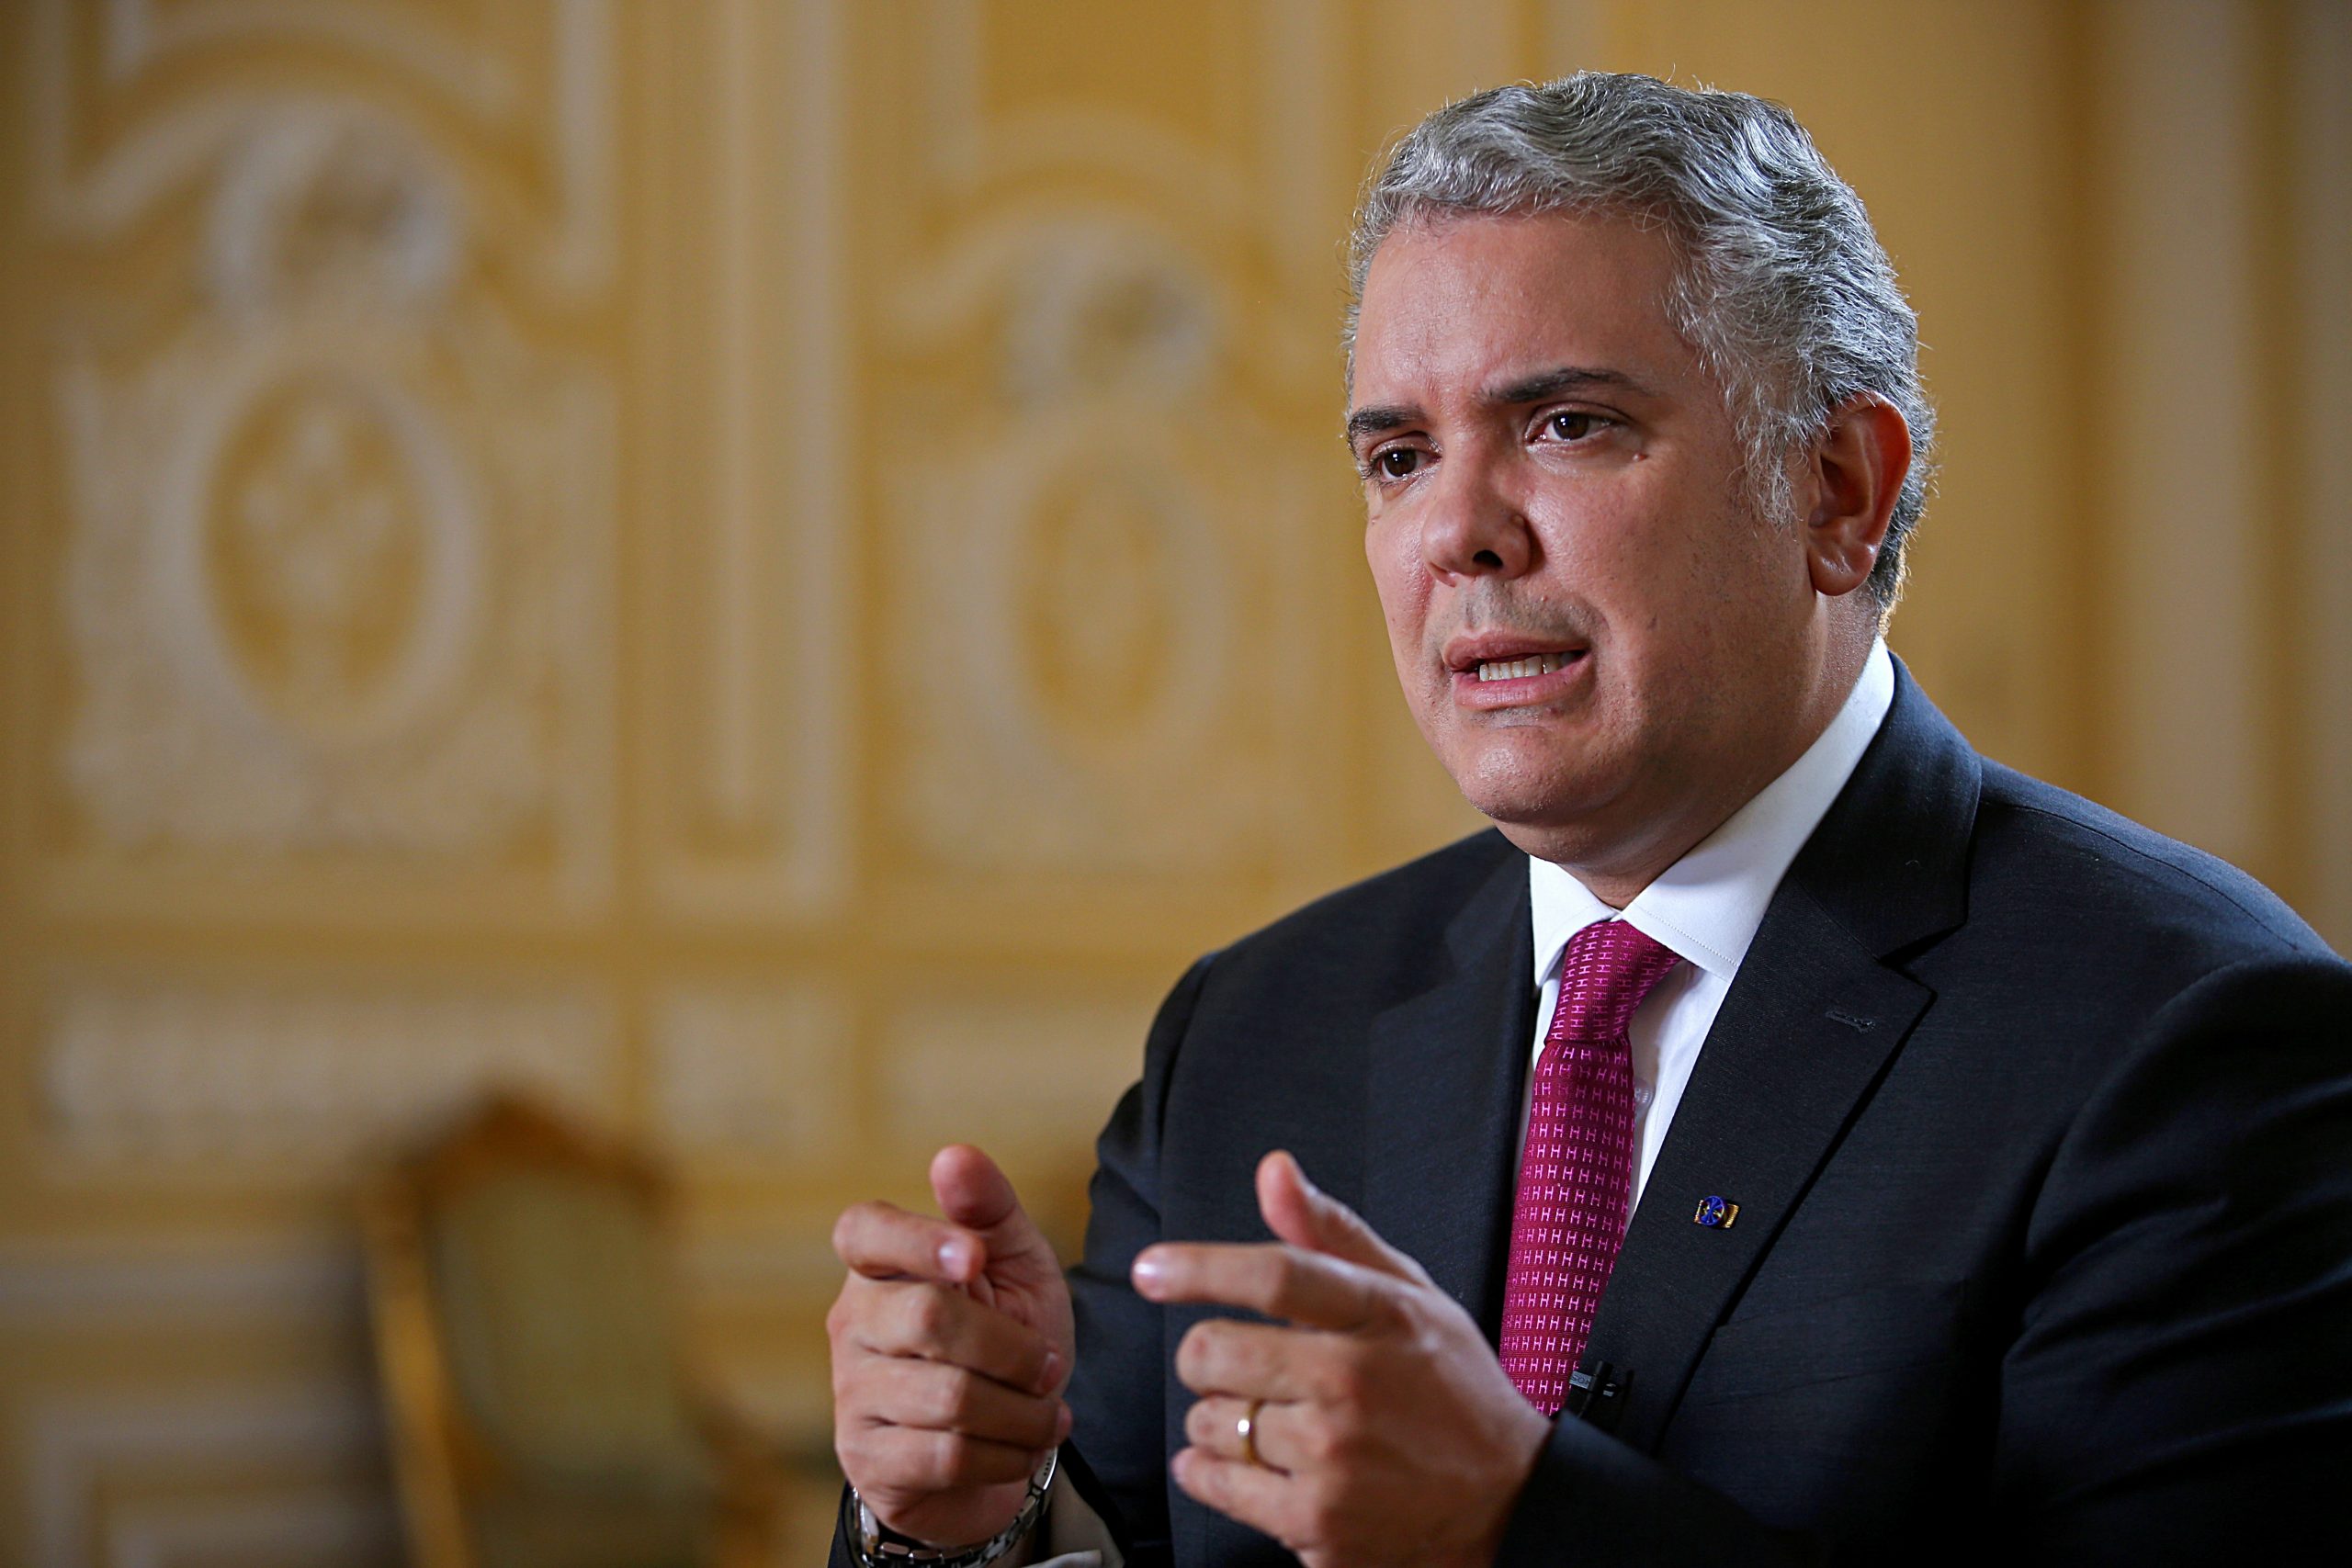 FILE PHOTO: Colombia's President Ivan Duque speaks during an interview with Reuters in Bogota FILE PHOTO: Colombia's President Ivan Duque speaks during an interview with Reuters in Bogota, Colombia, March 12, 2021. REUTERS/Luisa Gonzalez/File Photo Luisa Gonzalez